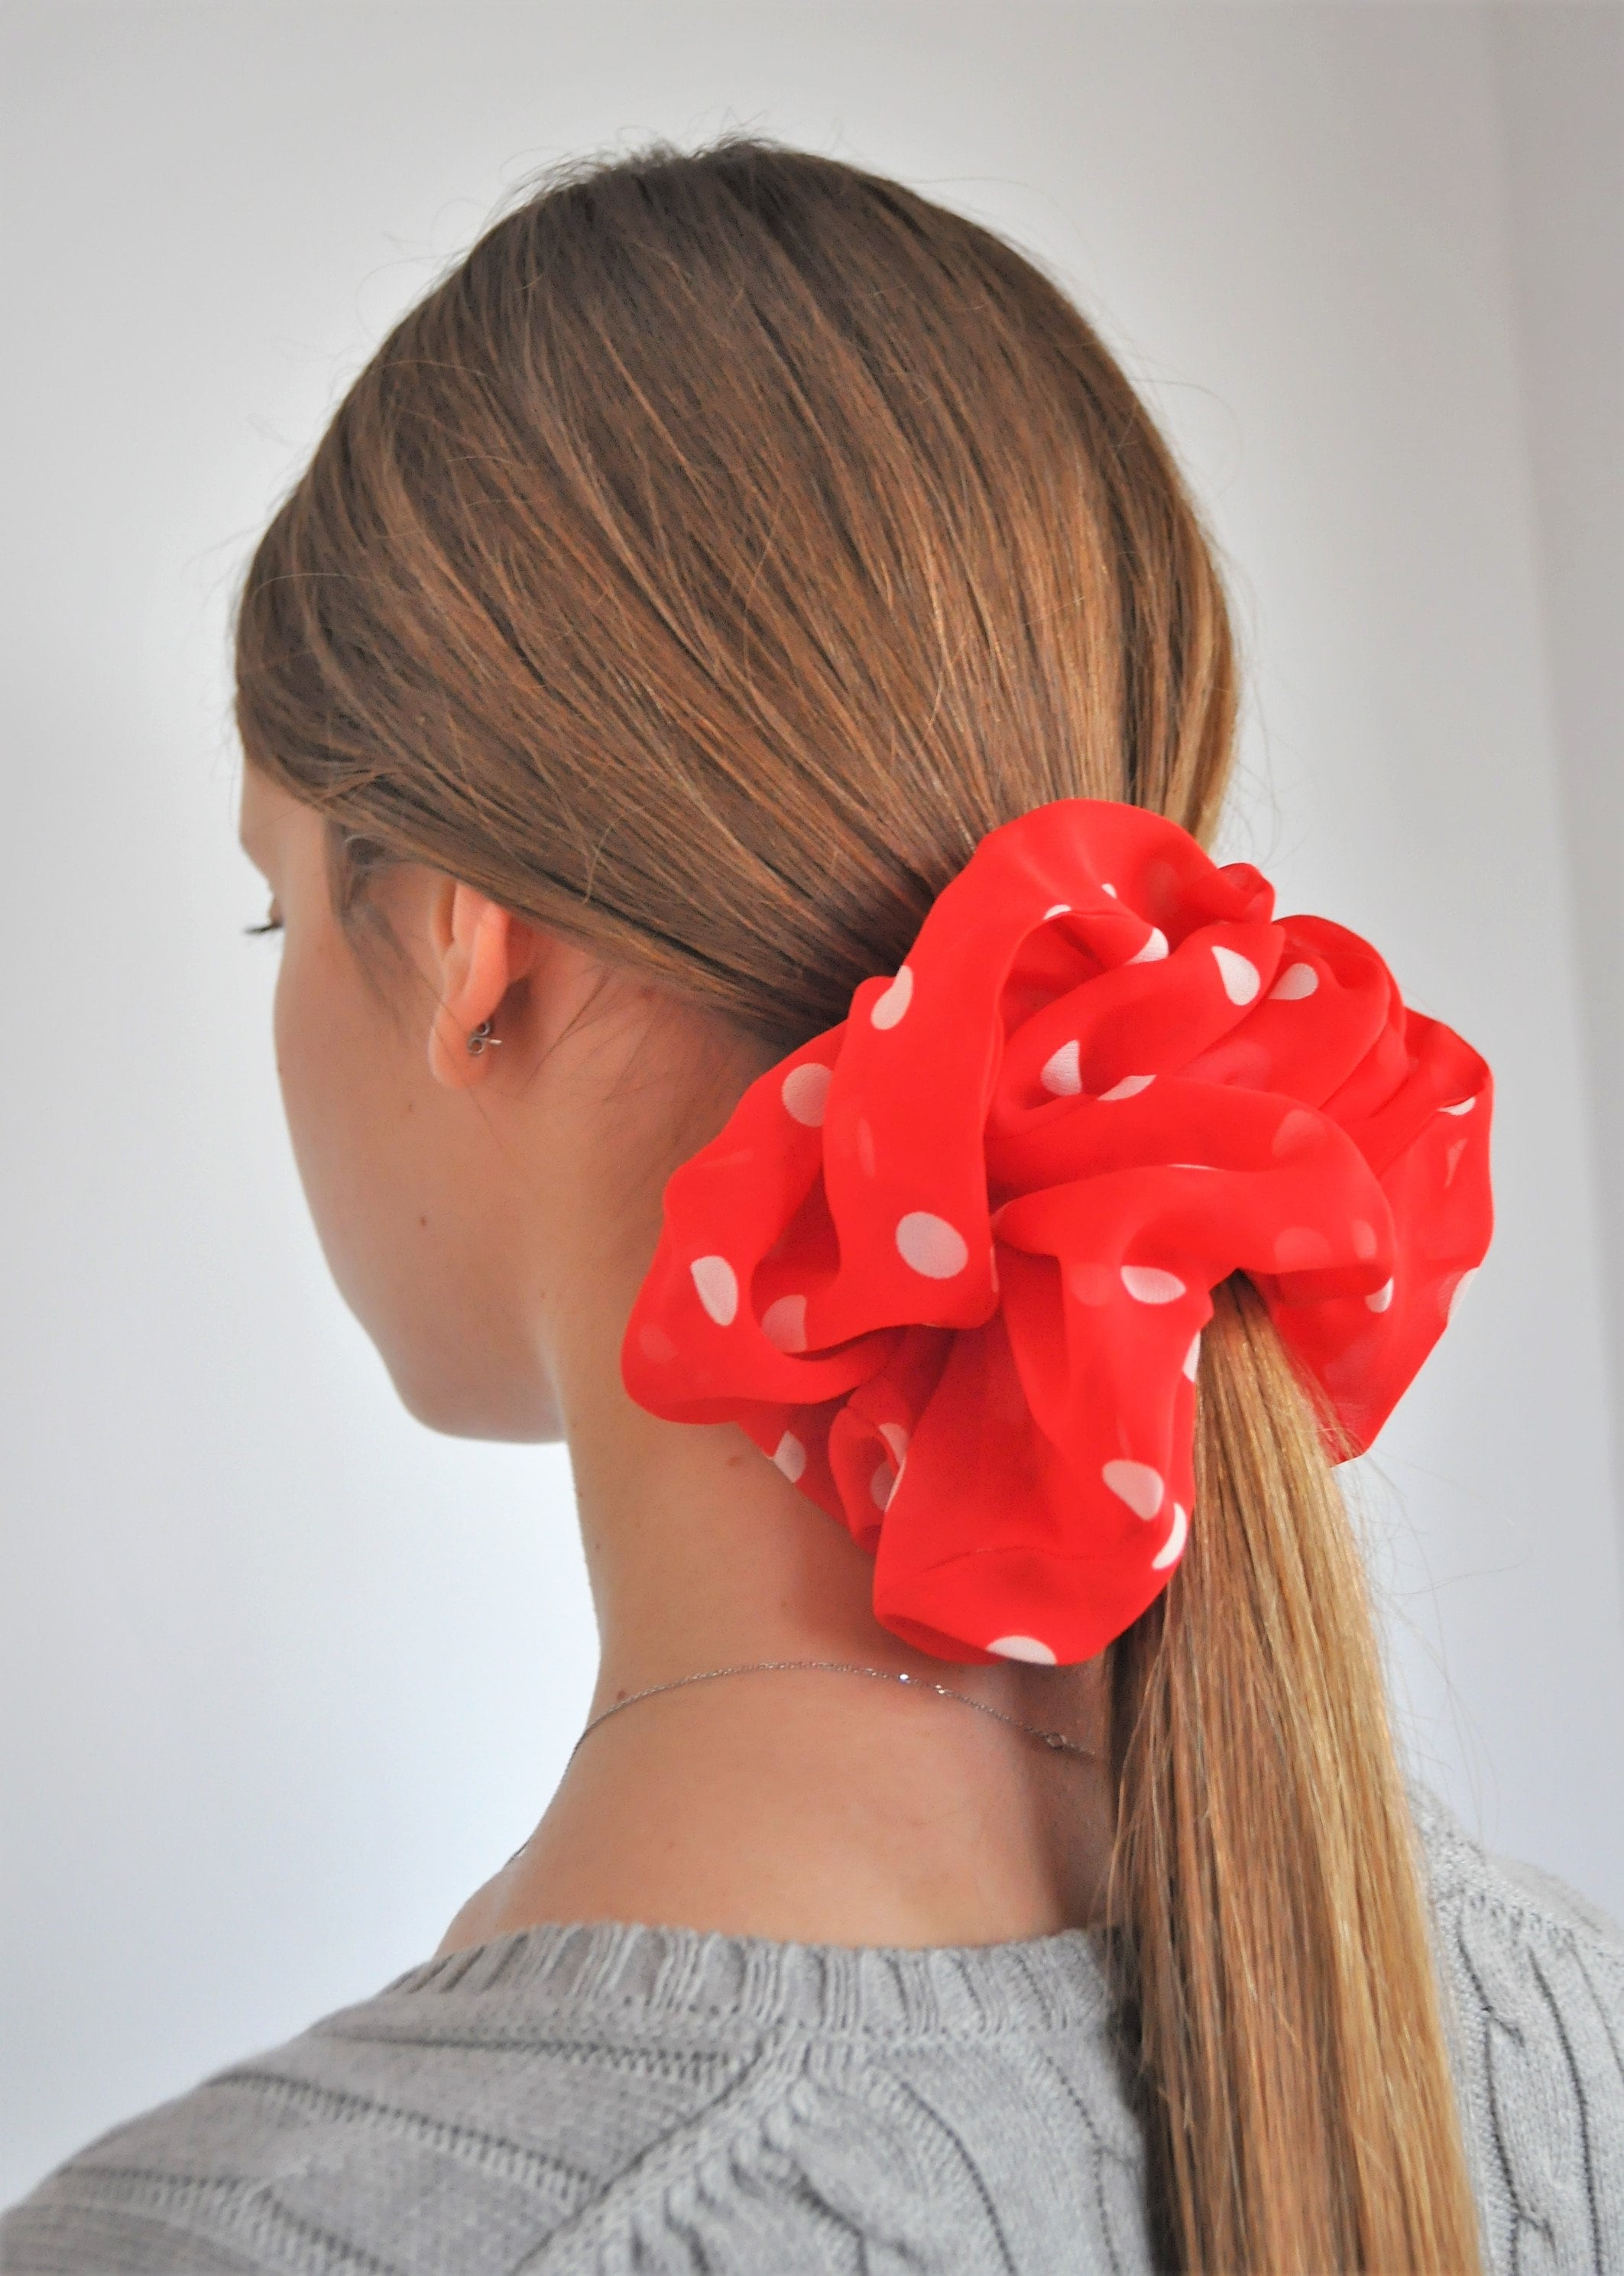 XXL Scrunchies Are Taking Over Instagram 13 Scrunchies to Buy in 2022   Glamour